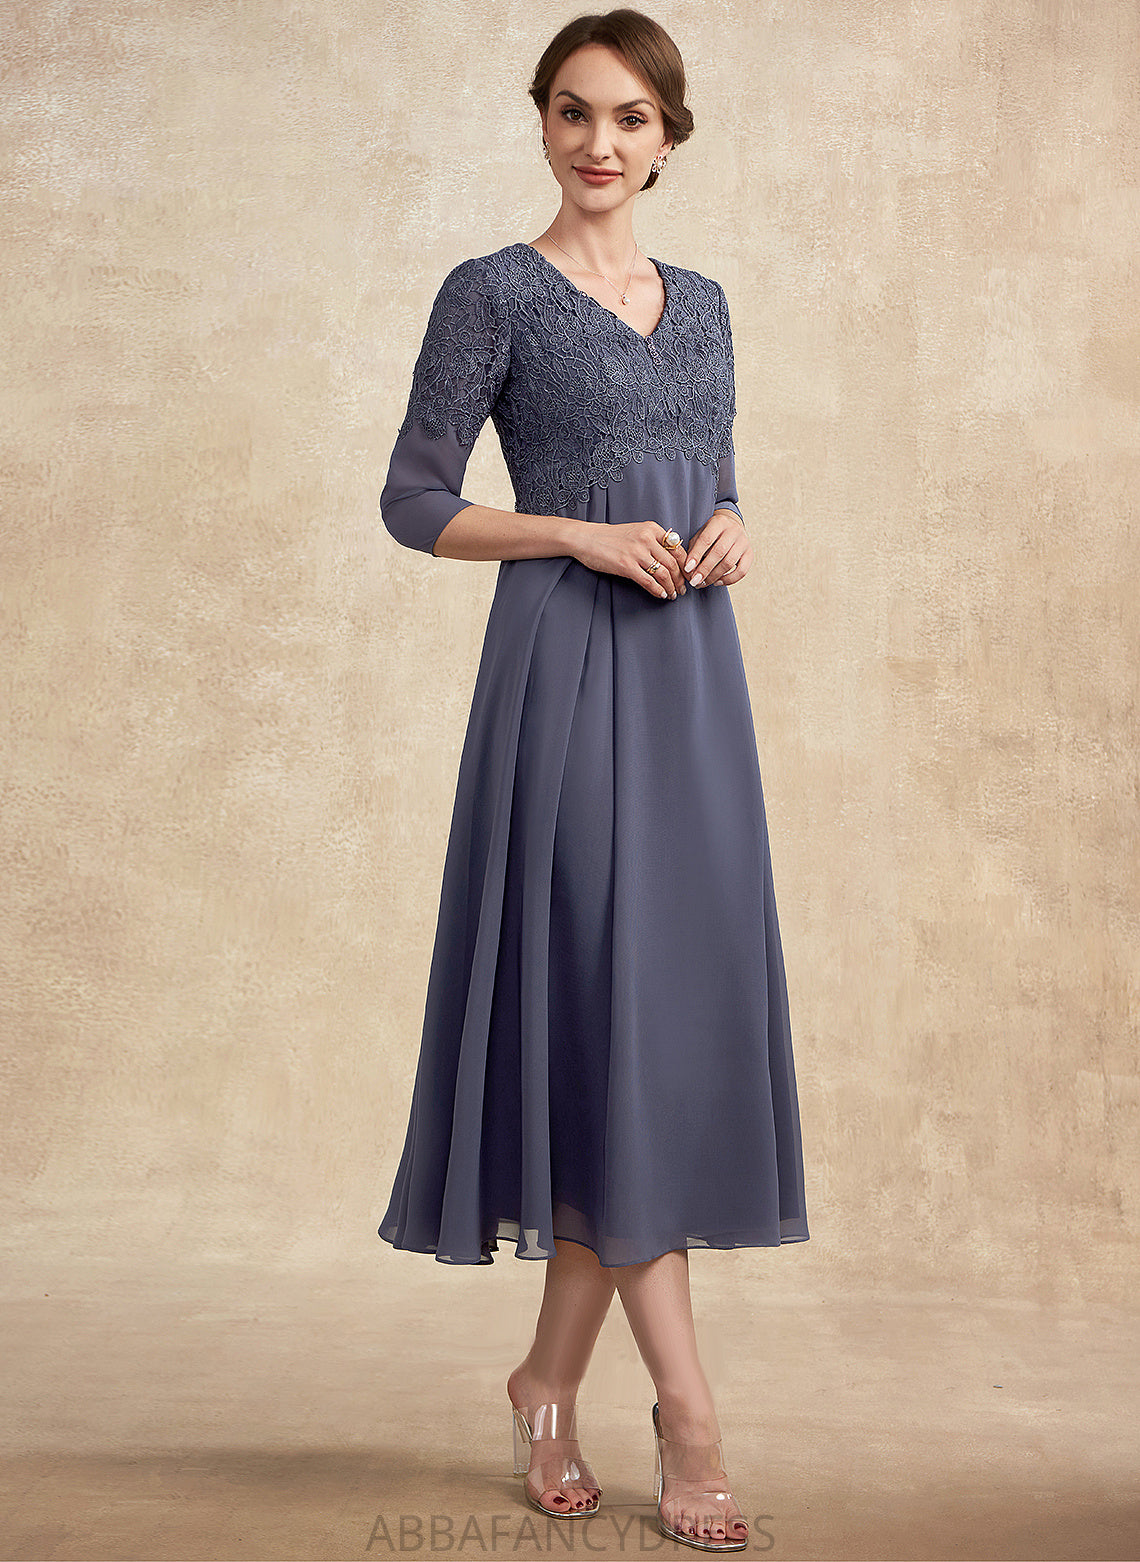 With Tea-Length Mother Dress Lace Mother of the Bride Dresses of Beading Chiffon V-neck Bride the Frederica A-Line